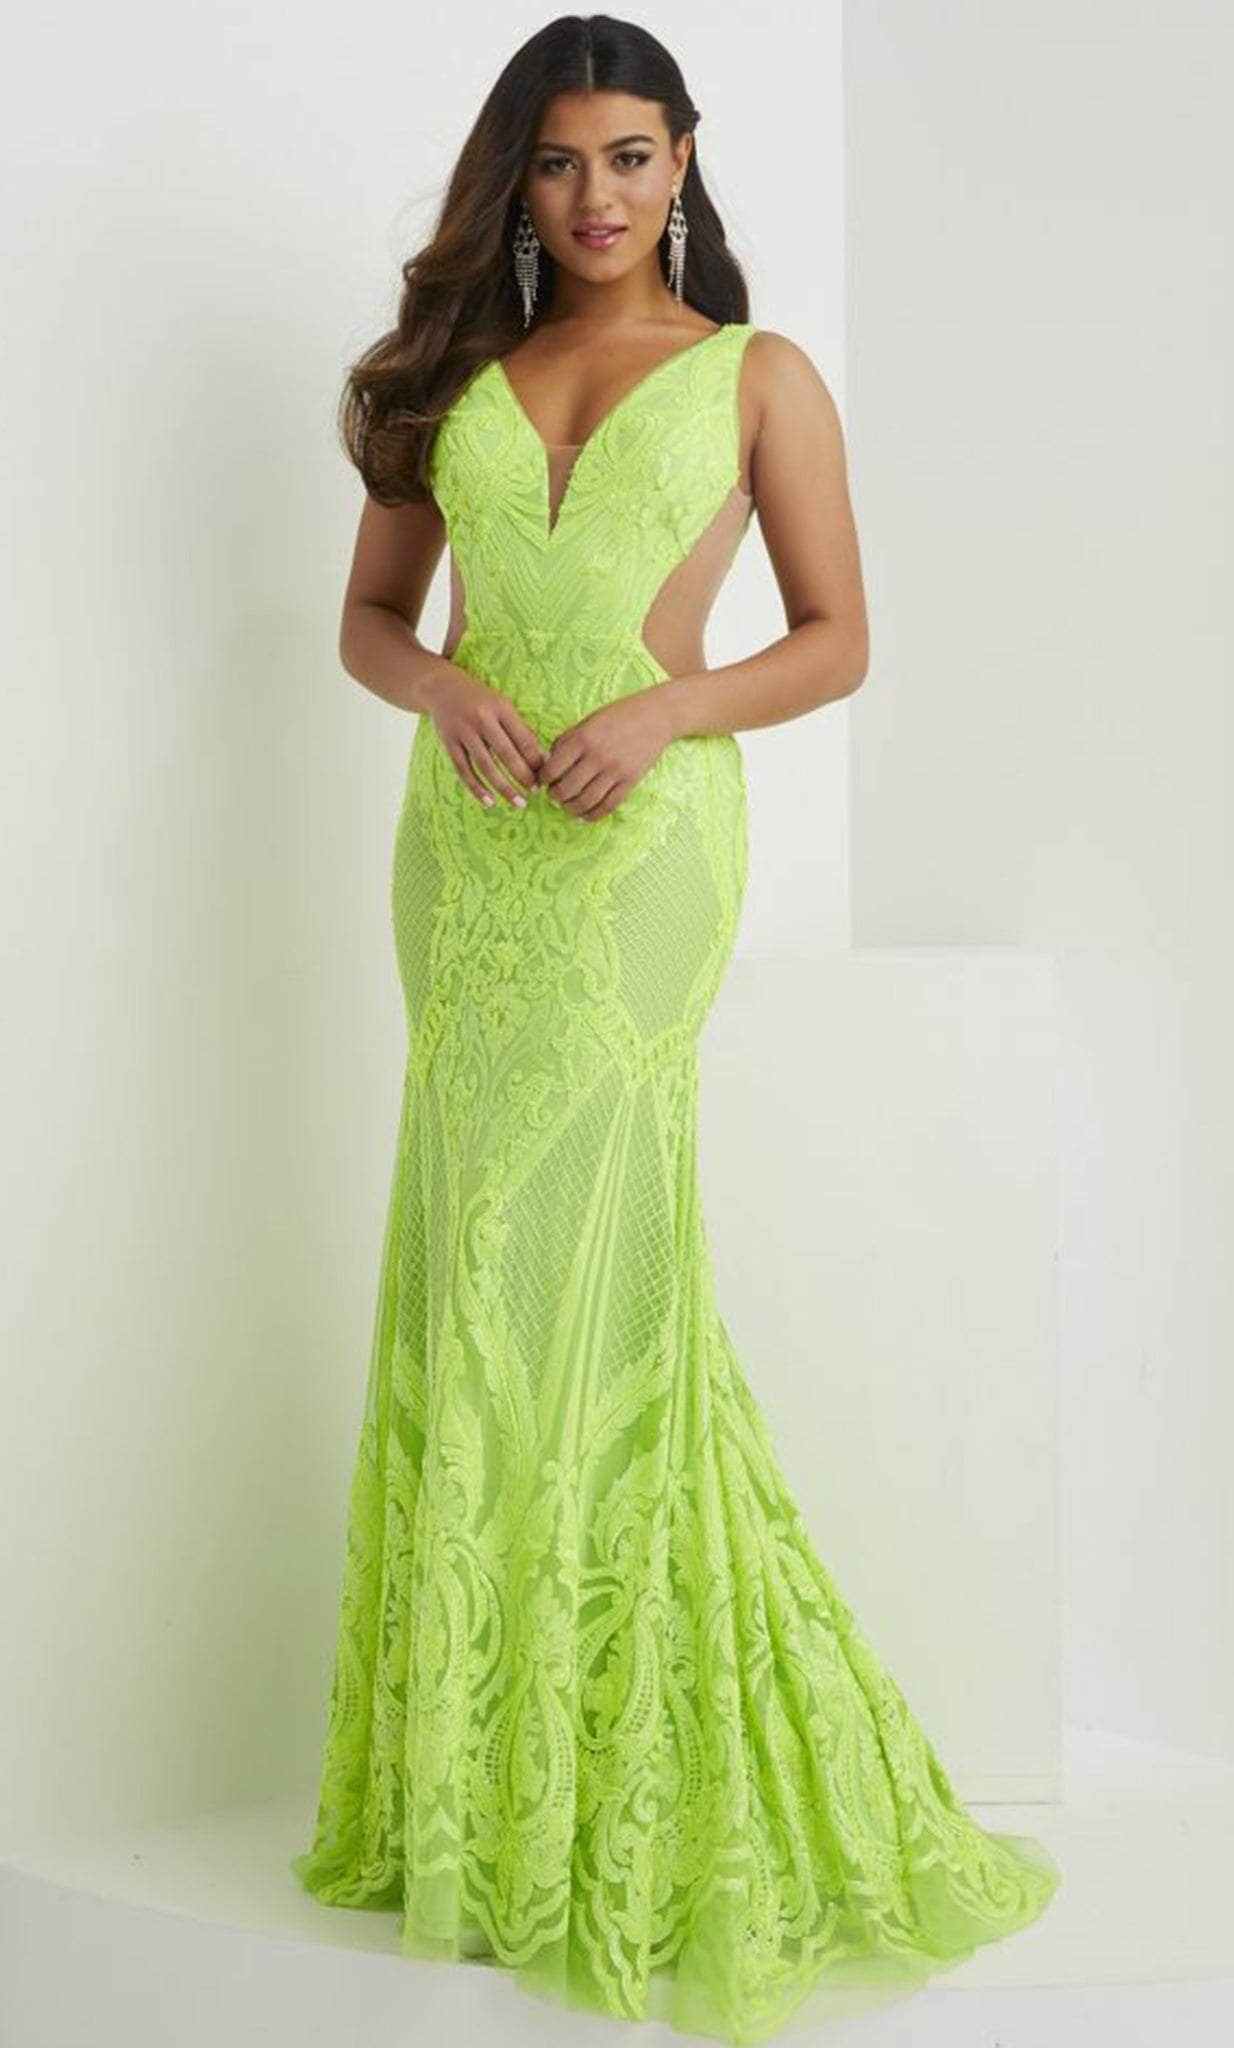 Panoply 14142 - Sequined V-Neck Evening Gown
